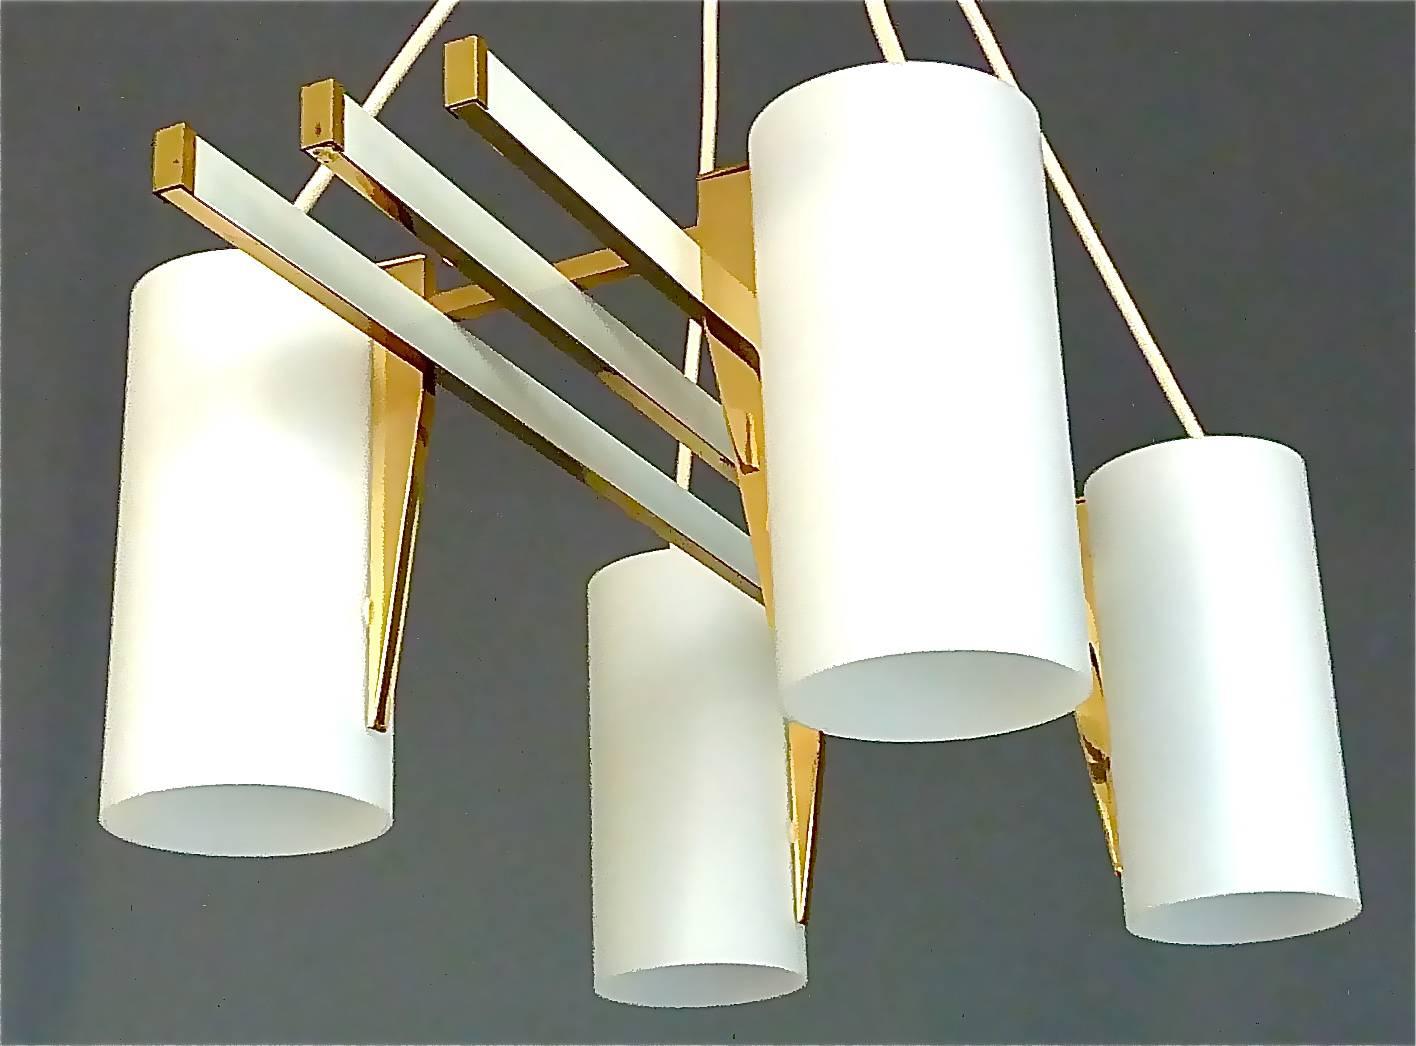 Sculptural four-light chandelier in the style of Angelo Lelli for Arredoluce. It is made of a white enameled metal, brass metal construction with highly sophisticated brass details and four satin frosted glass tube shades. The awesome pendant lamp